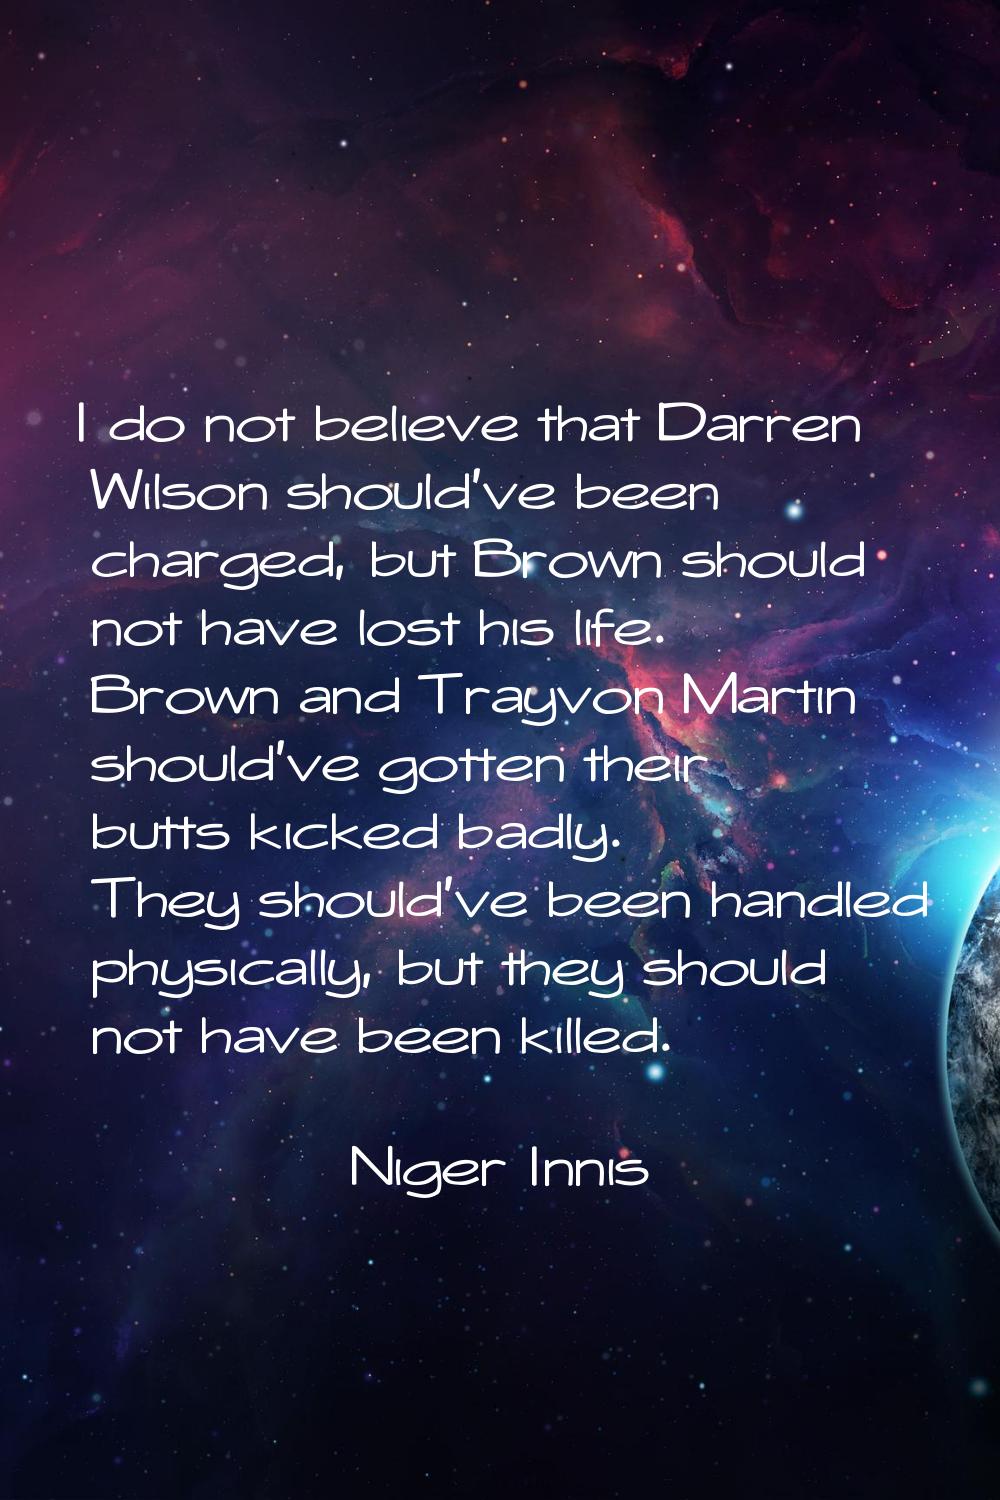 I do not believe that Darren Wilson should've been charged, but Brown should not have lost his life